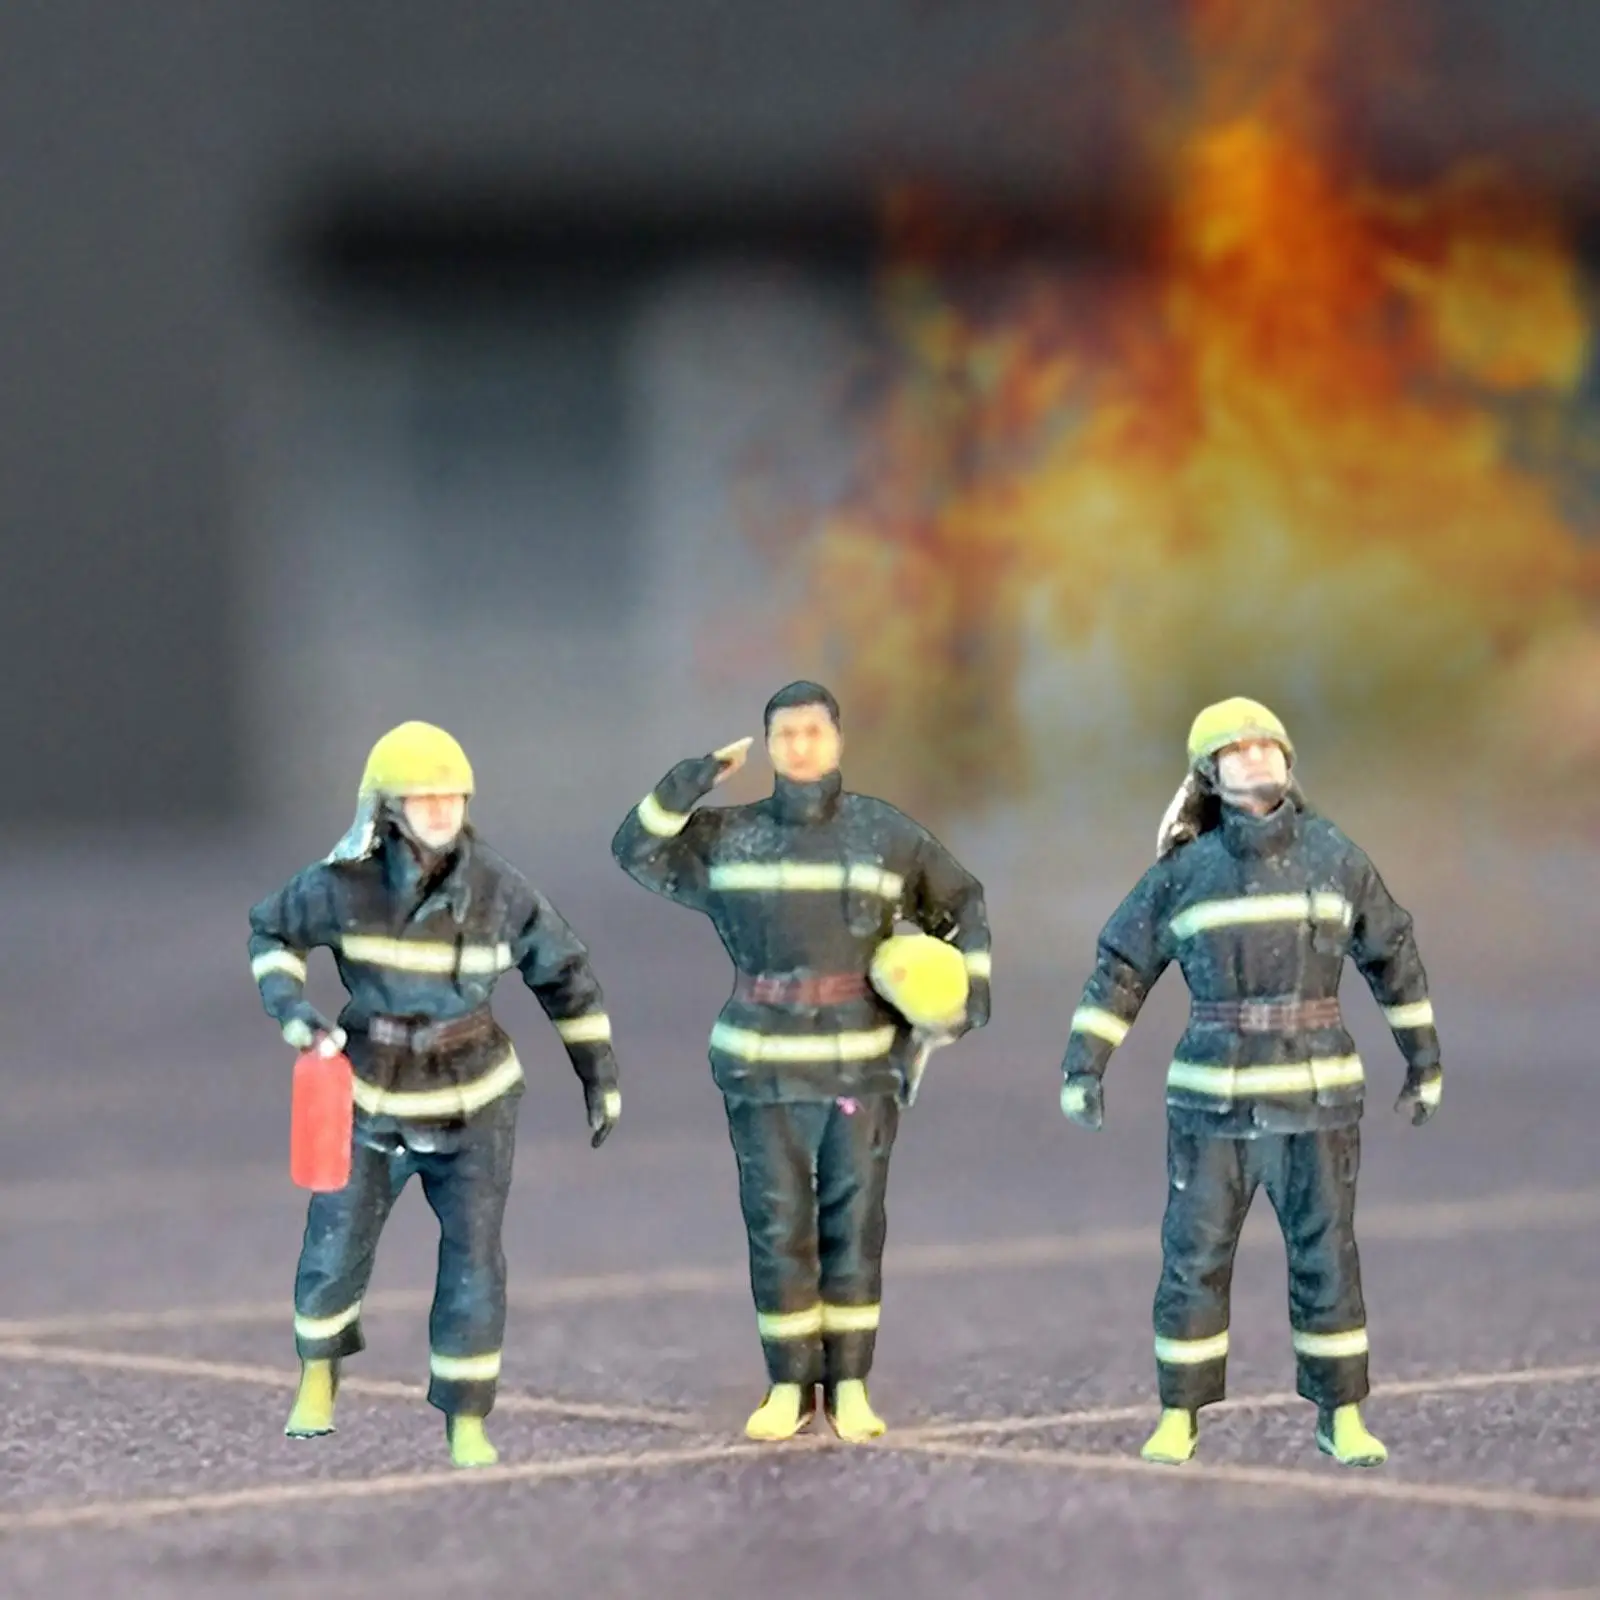 1/64 Resin Firefighter Figures Miniature Model Tiny People Model for Photography Props Micro Landscapes Building Diorama Decor